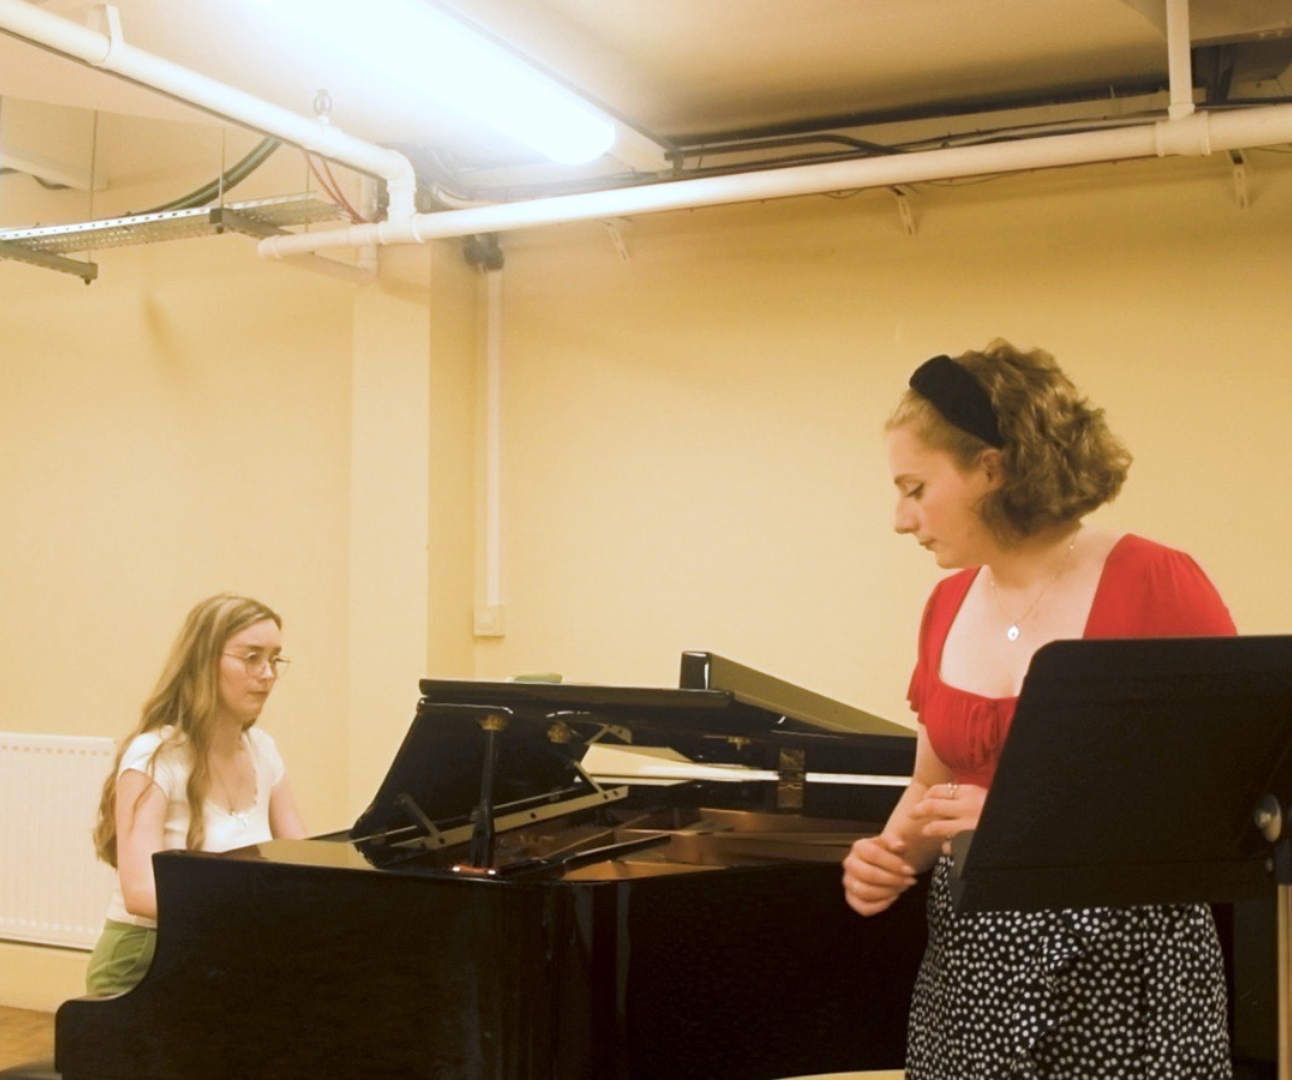 Two women in a room, woman on the left with blond hair and white t-shirt is playing the piano sat down, while the other one is on the right side, leaning on the piano, with short brown hair and a red t-shirt